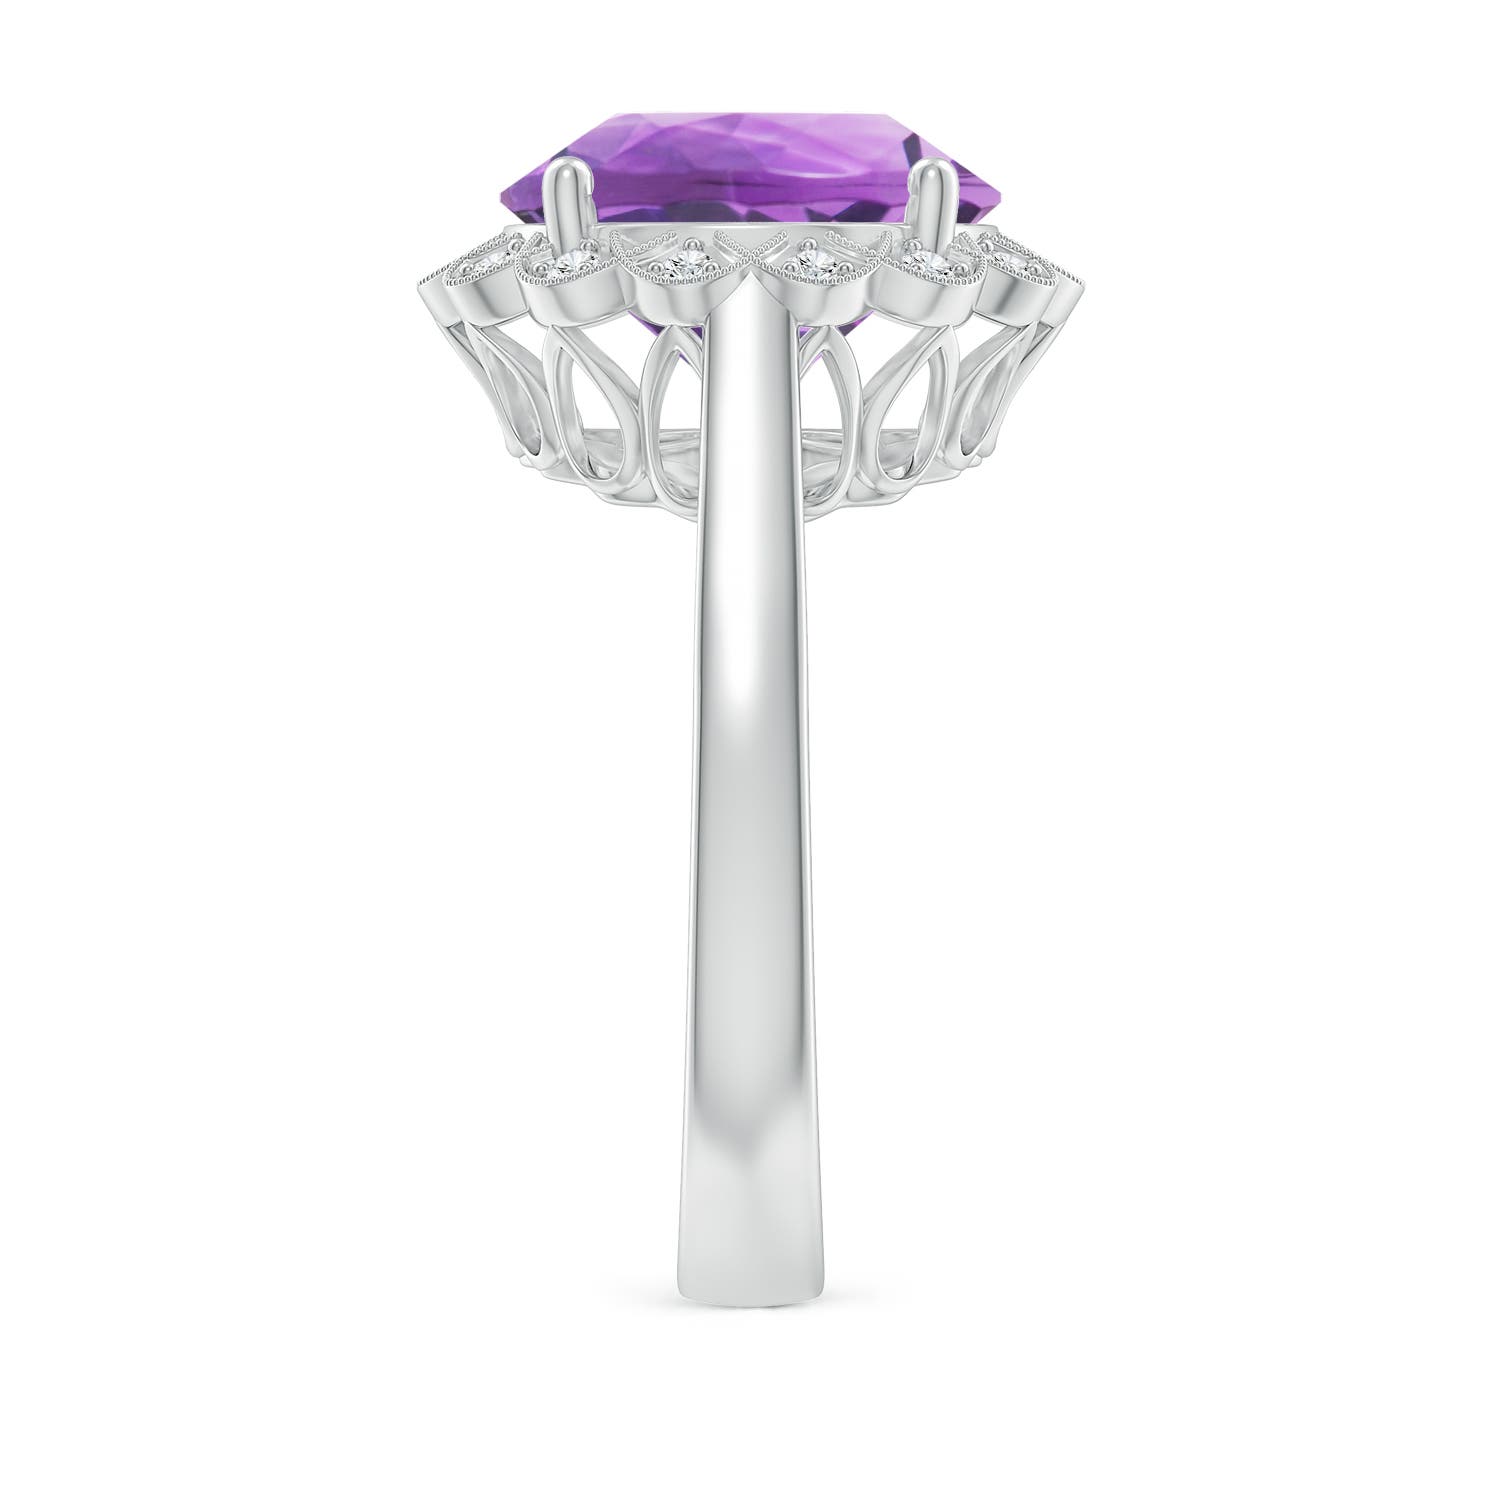 A- Amethyst / 4.86 CT / 14 KT White Gold